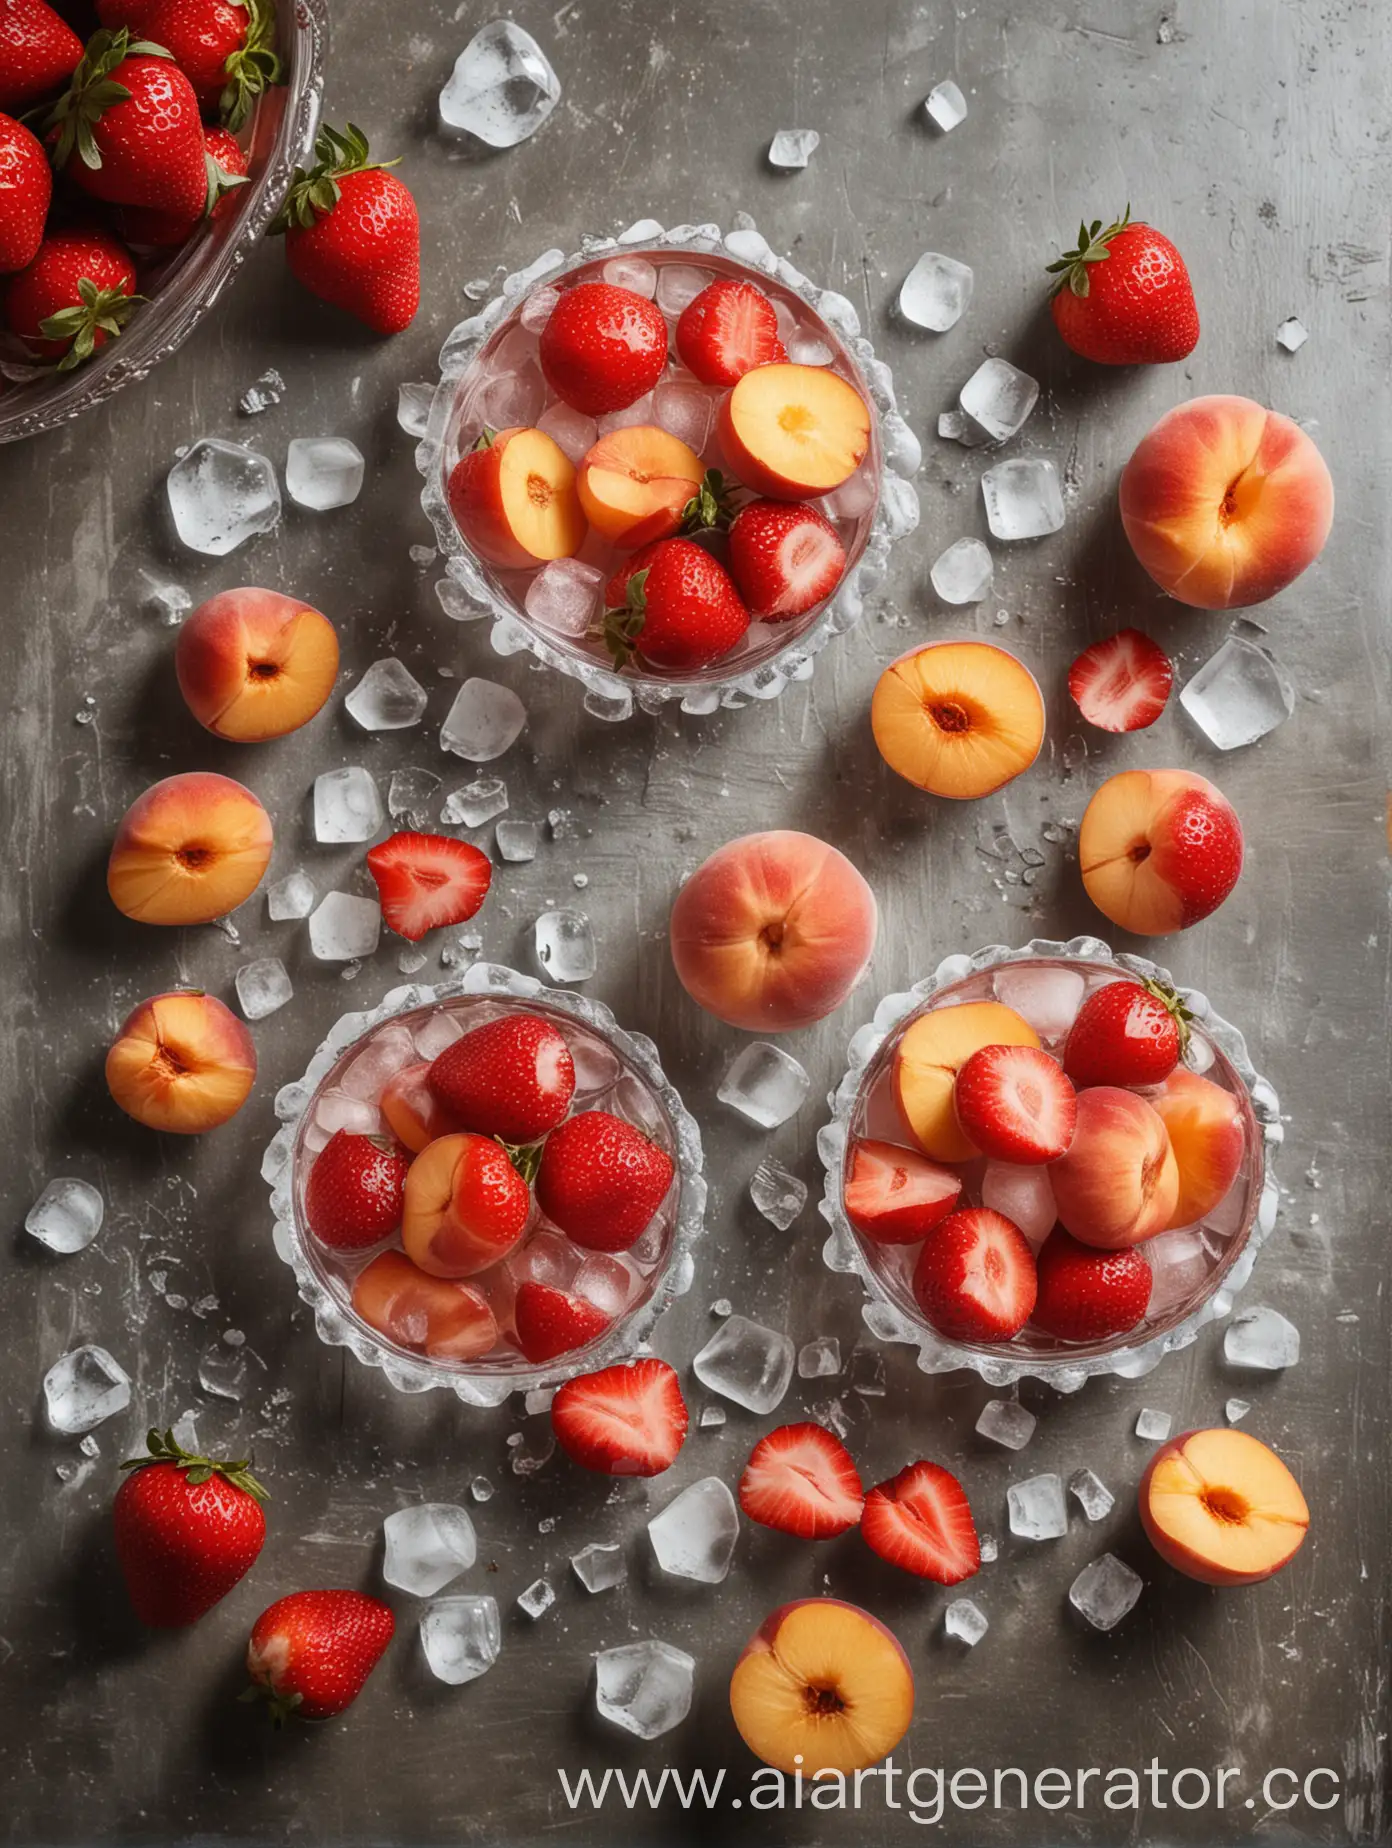 Fresh-Strawberries-Peaches-and-Clear-Ice-on-a-Table